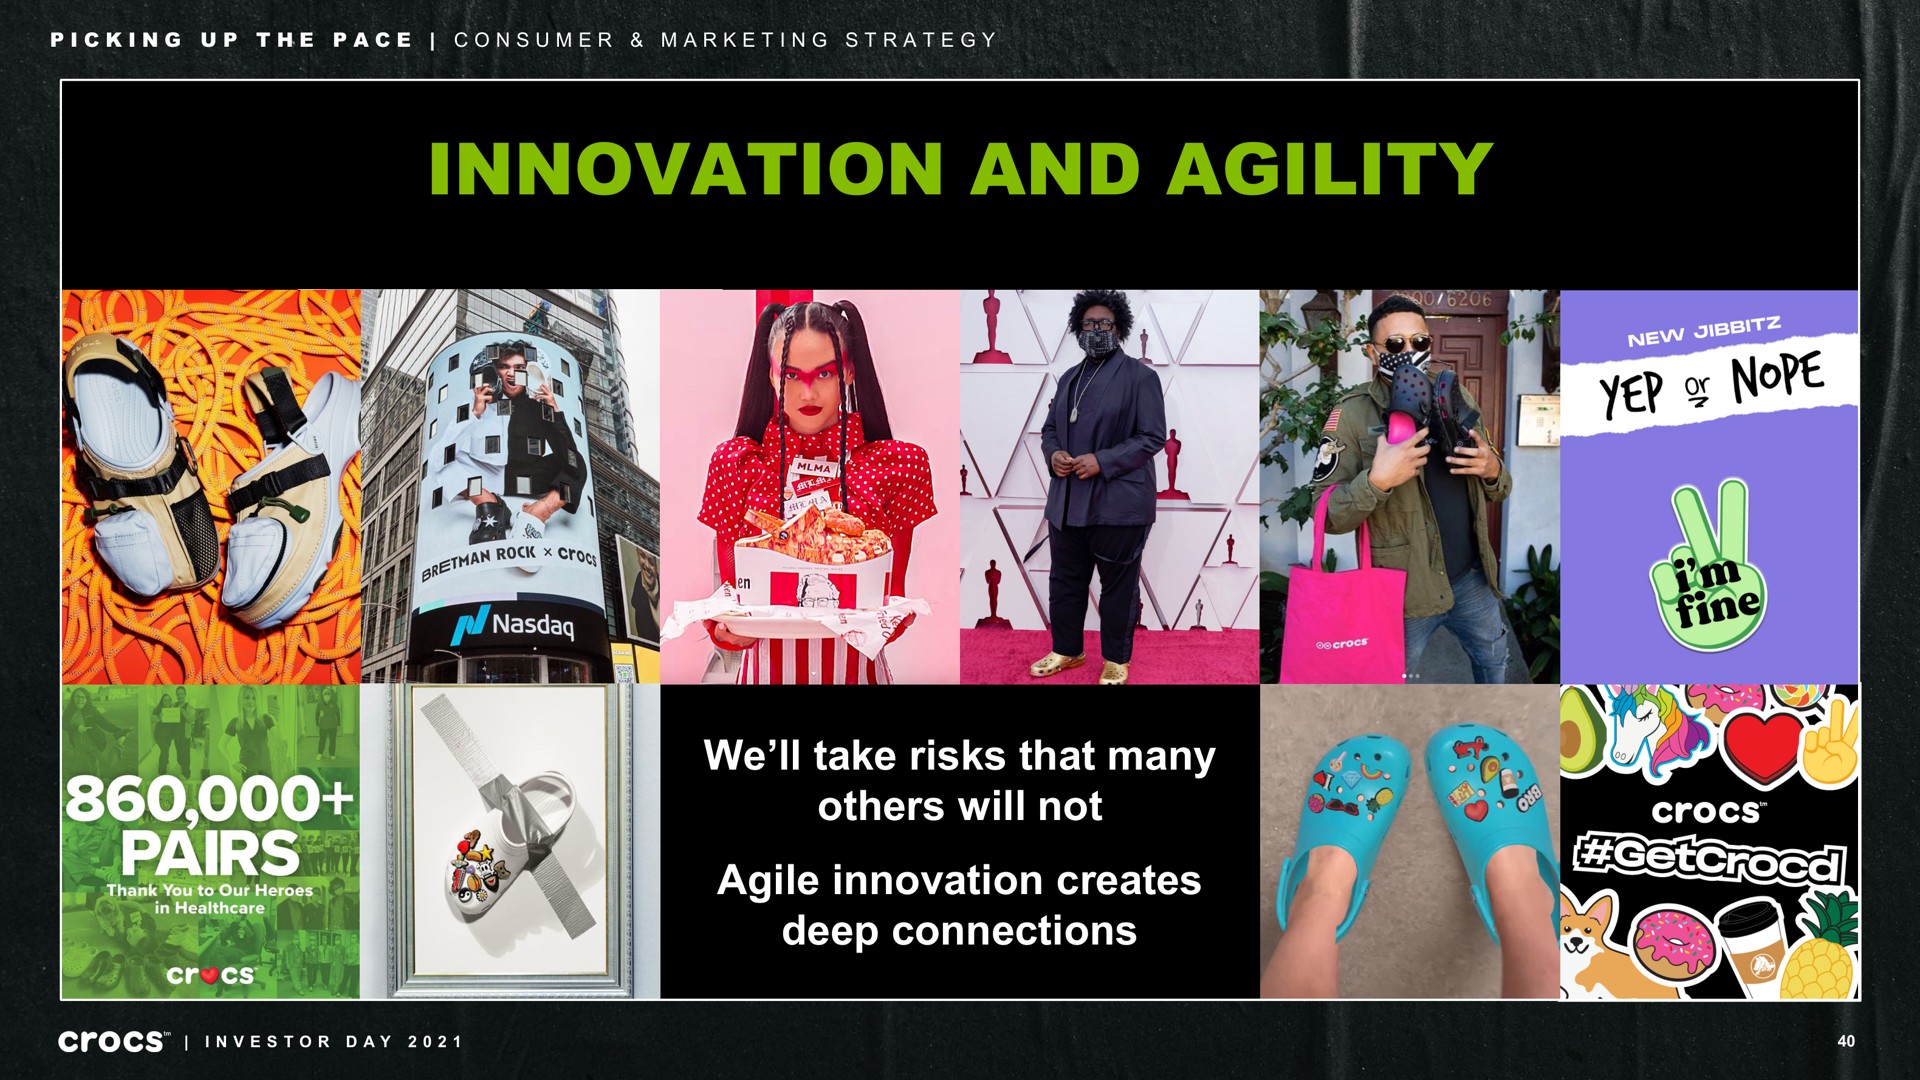 innovation and agility we take risks that many will not agile innovation creates deep connections picking up the pace consumer marketing strategy investor day | Crocs